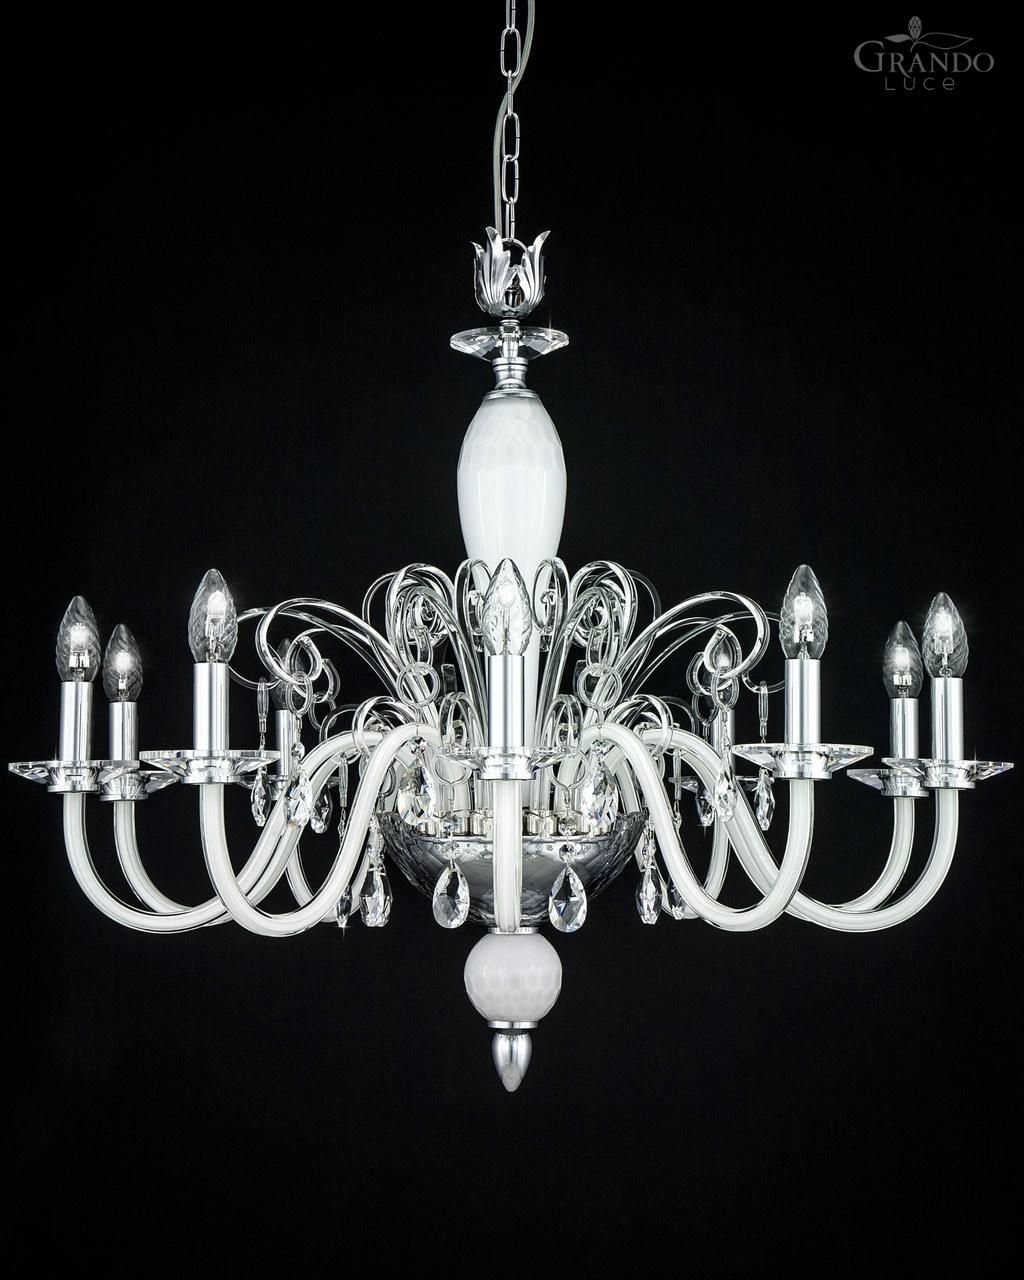 12010 Ch Chrome White Crystal Chandelier Grandoluce Throughout White Chandeliers (View 5 of 15)